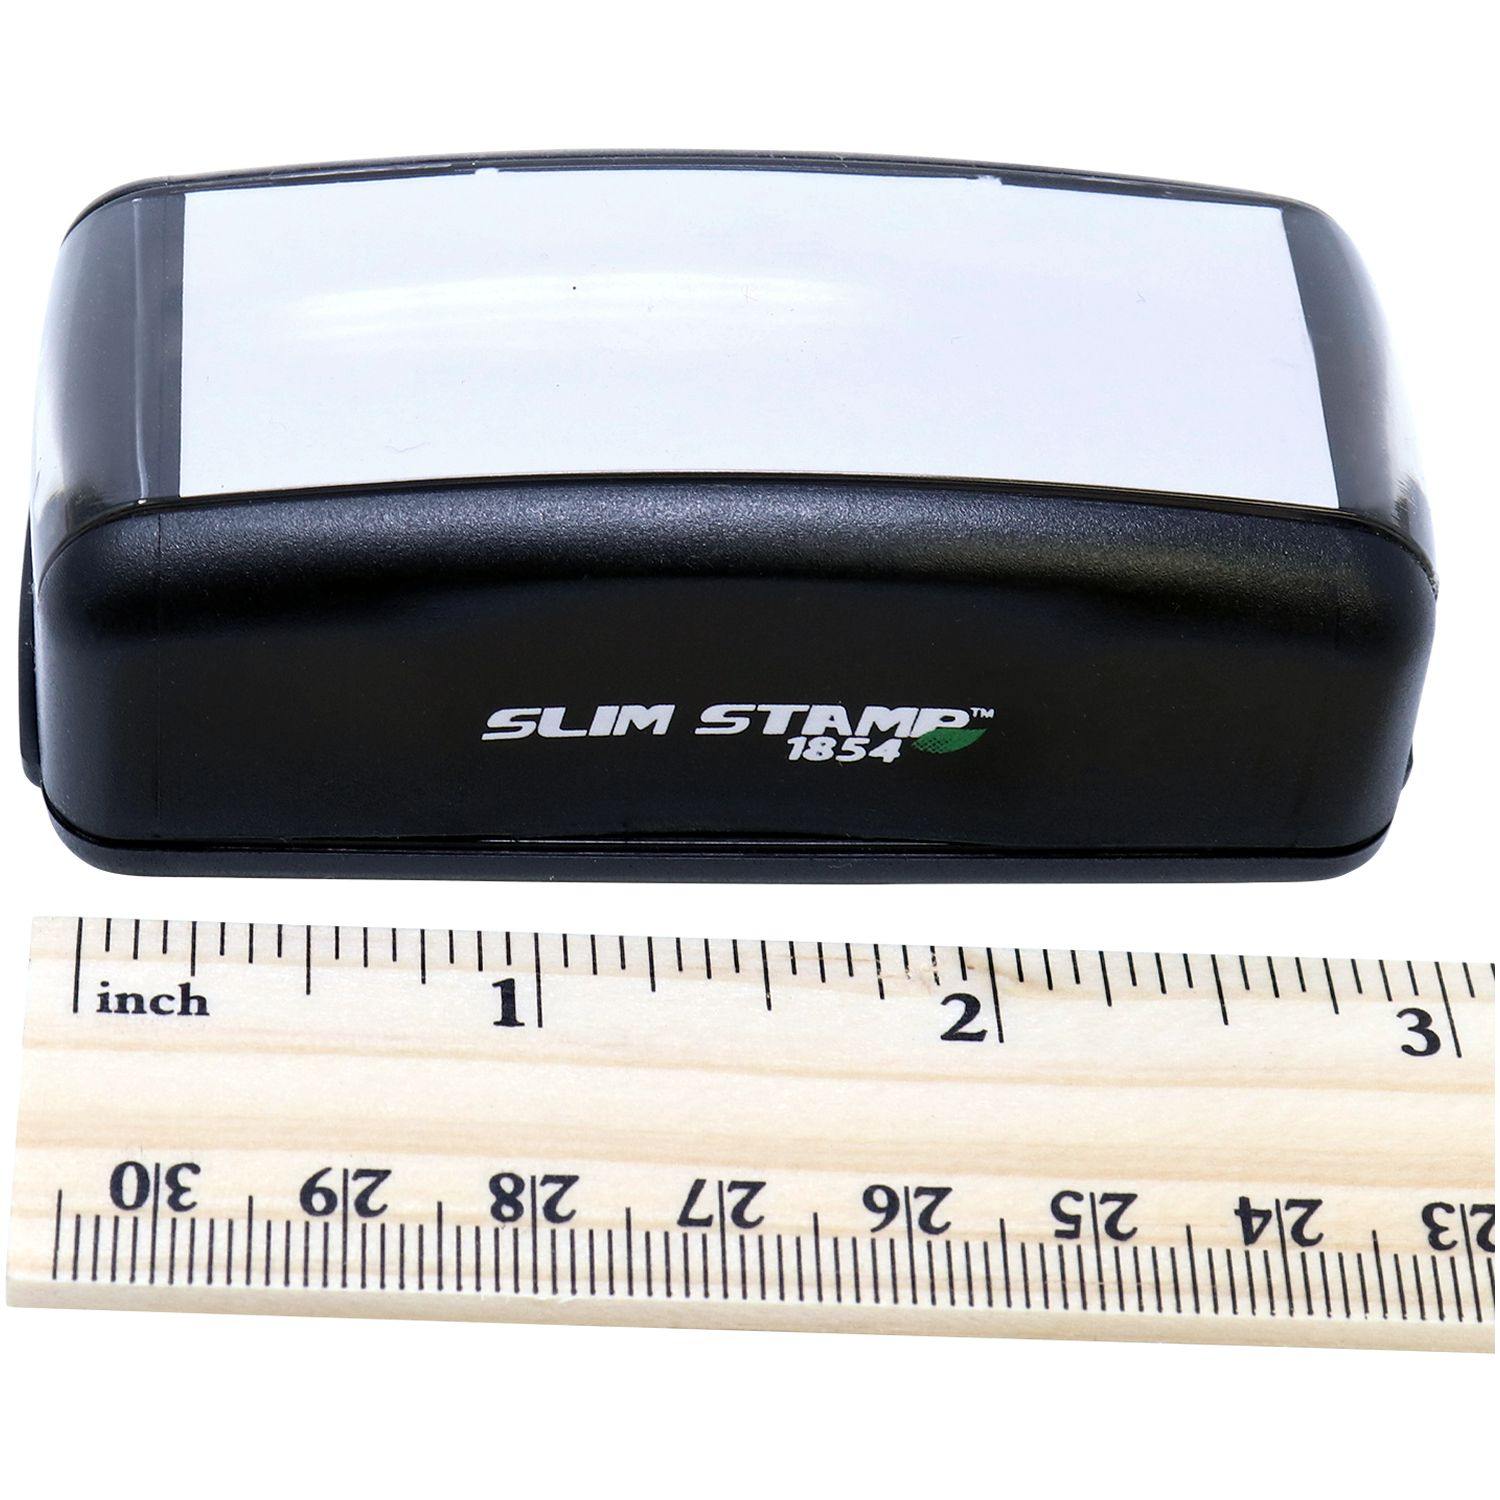 Measurement Large Pre-Inked For Deposit Only with Line Stamp with Ruler